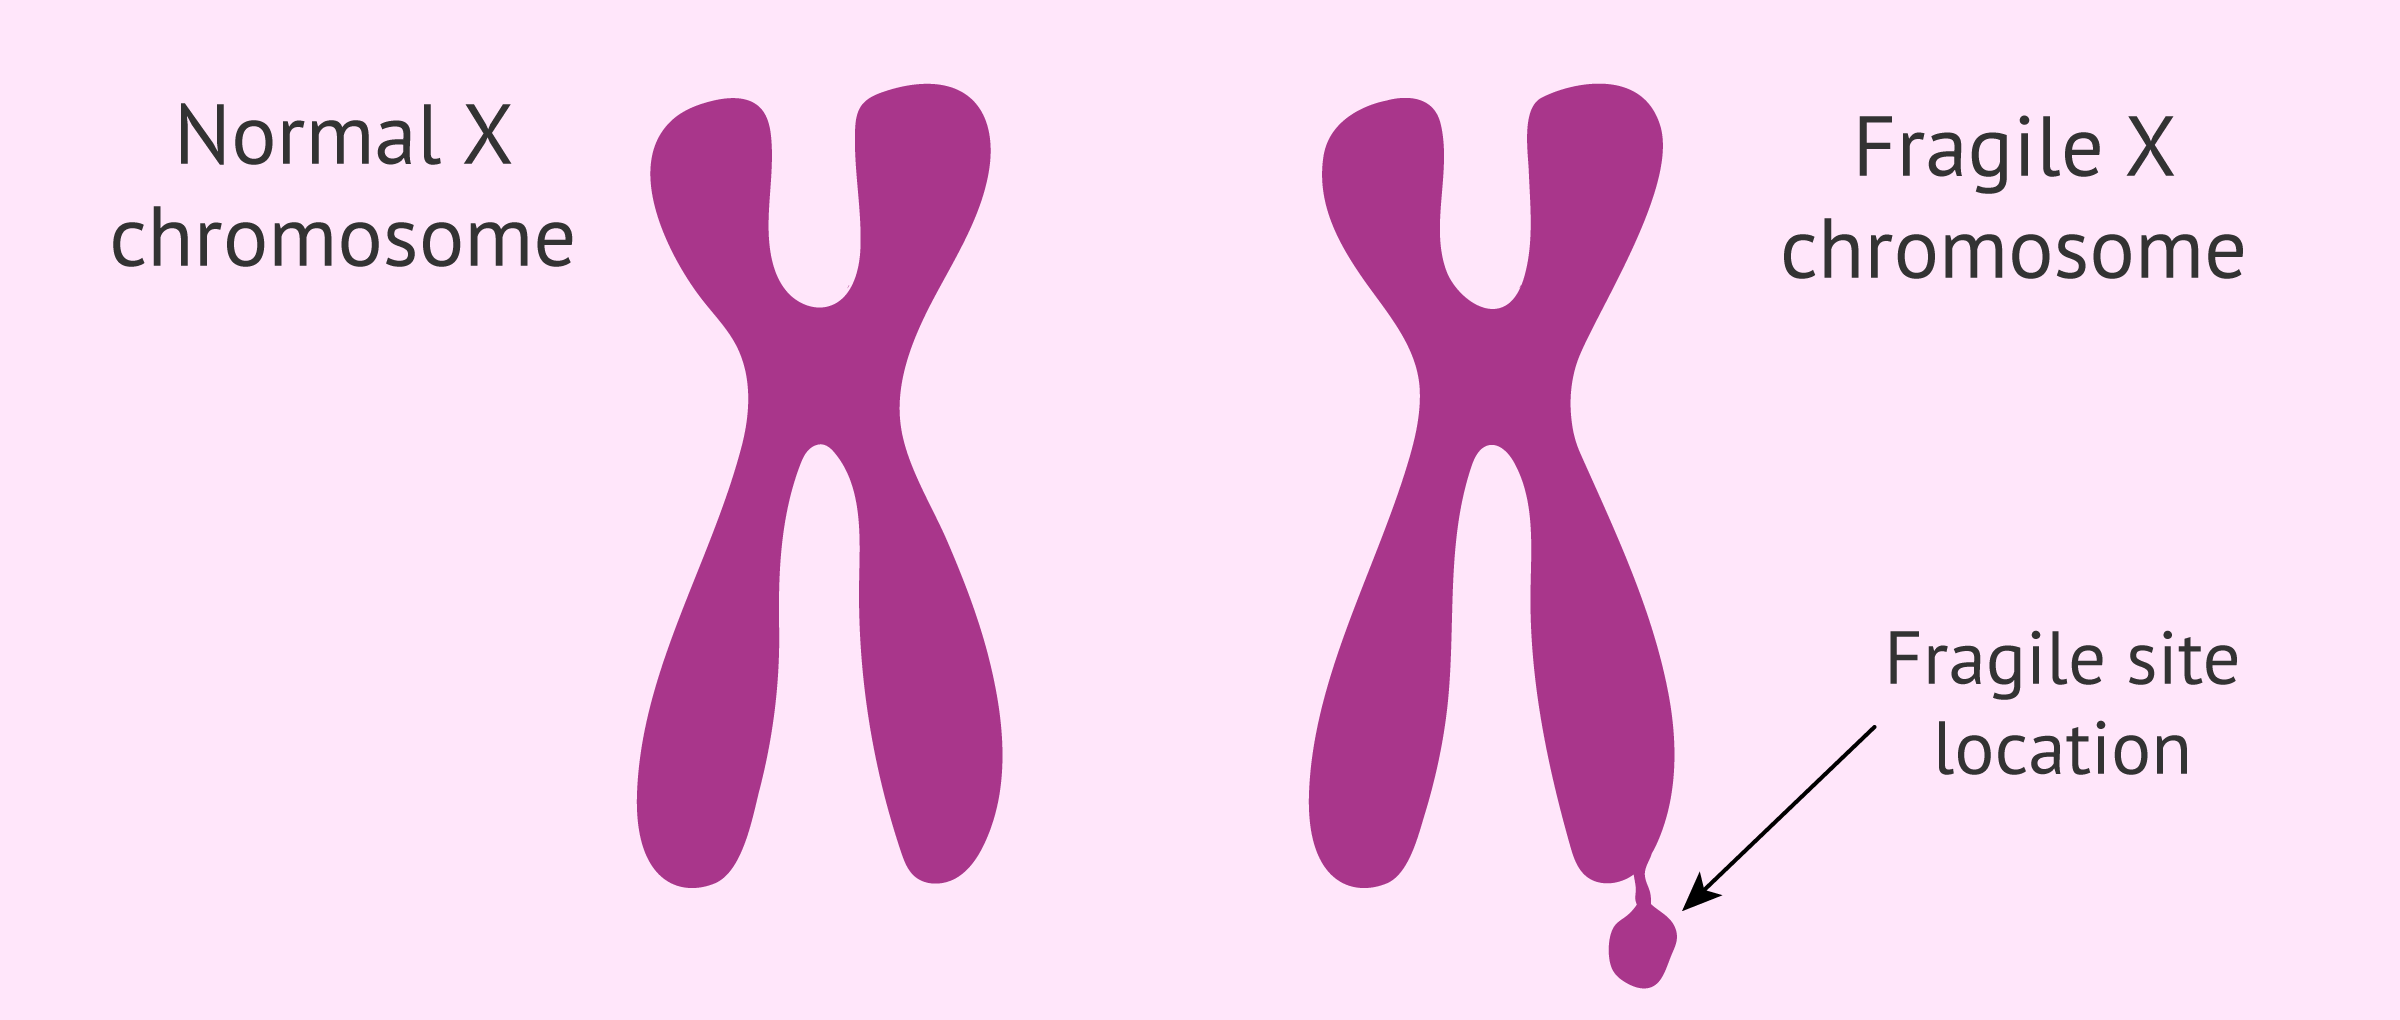 Comparison between normal chromosome and fragile X chromosome